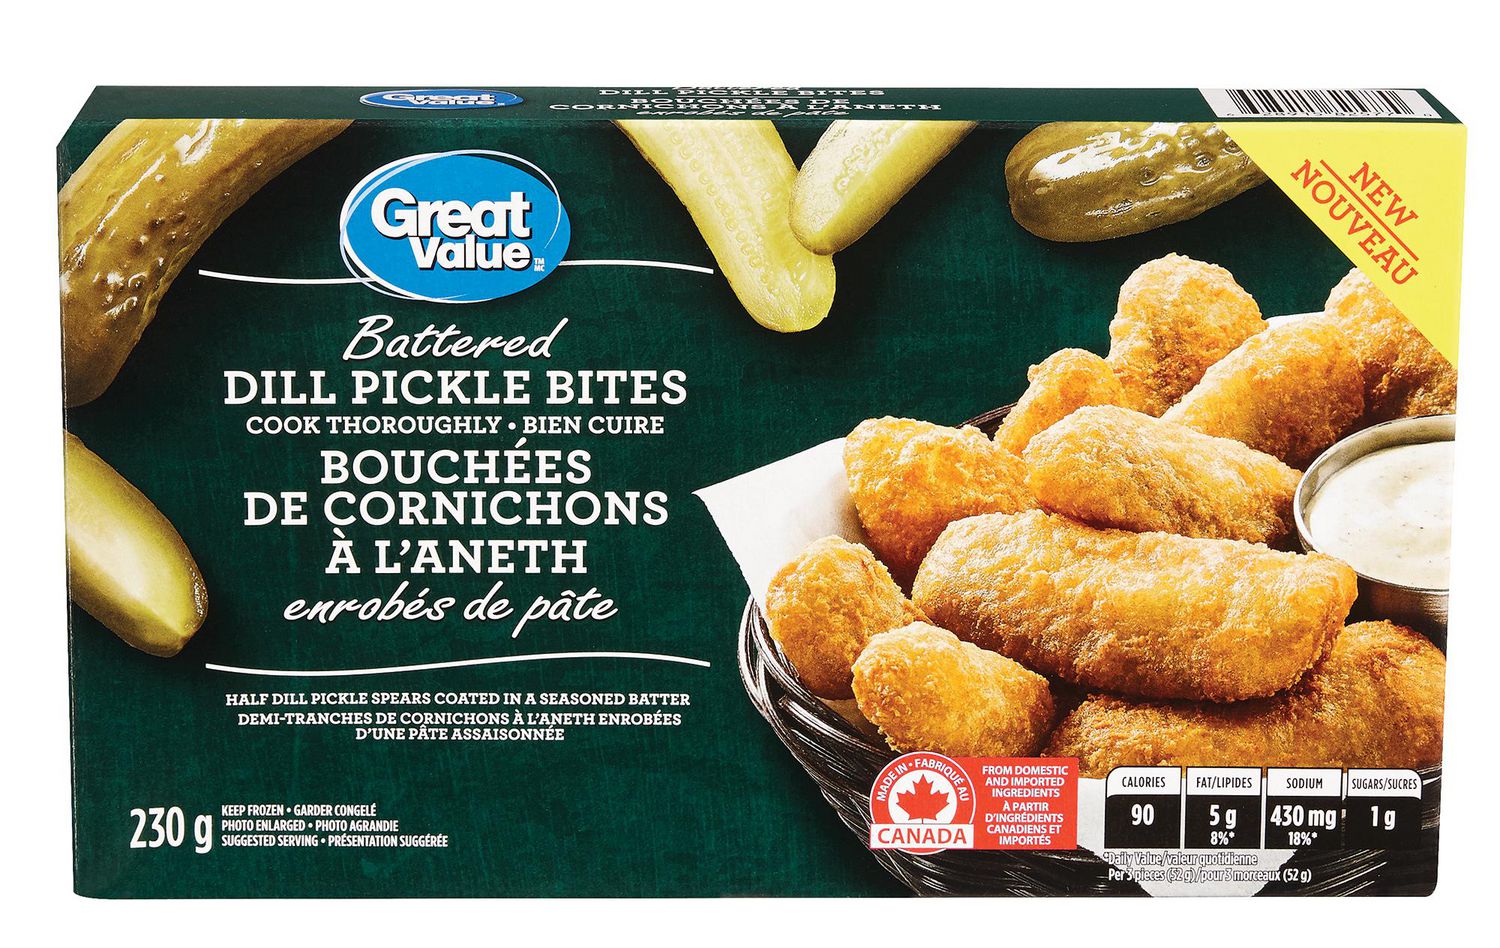 Great Value Battered Dill Pickle Bites Walmart Canada